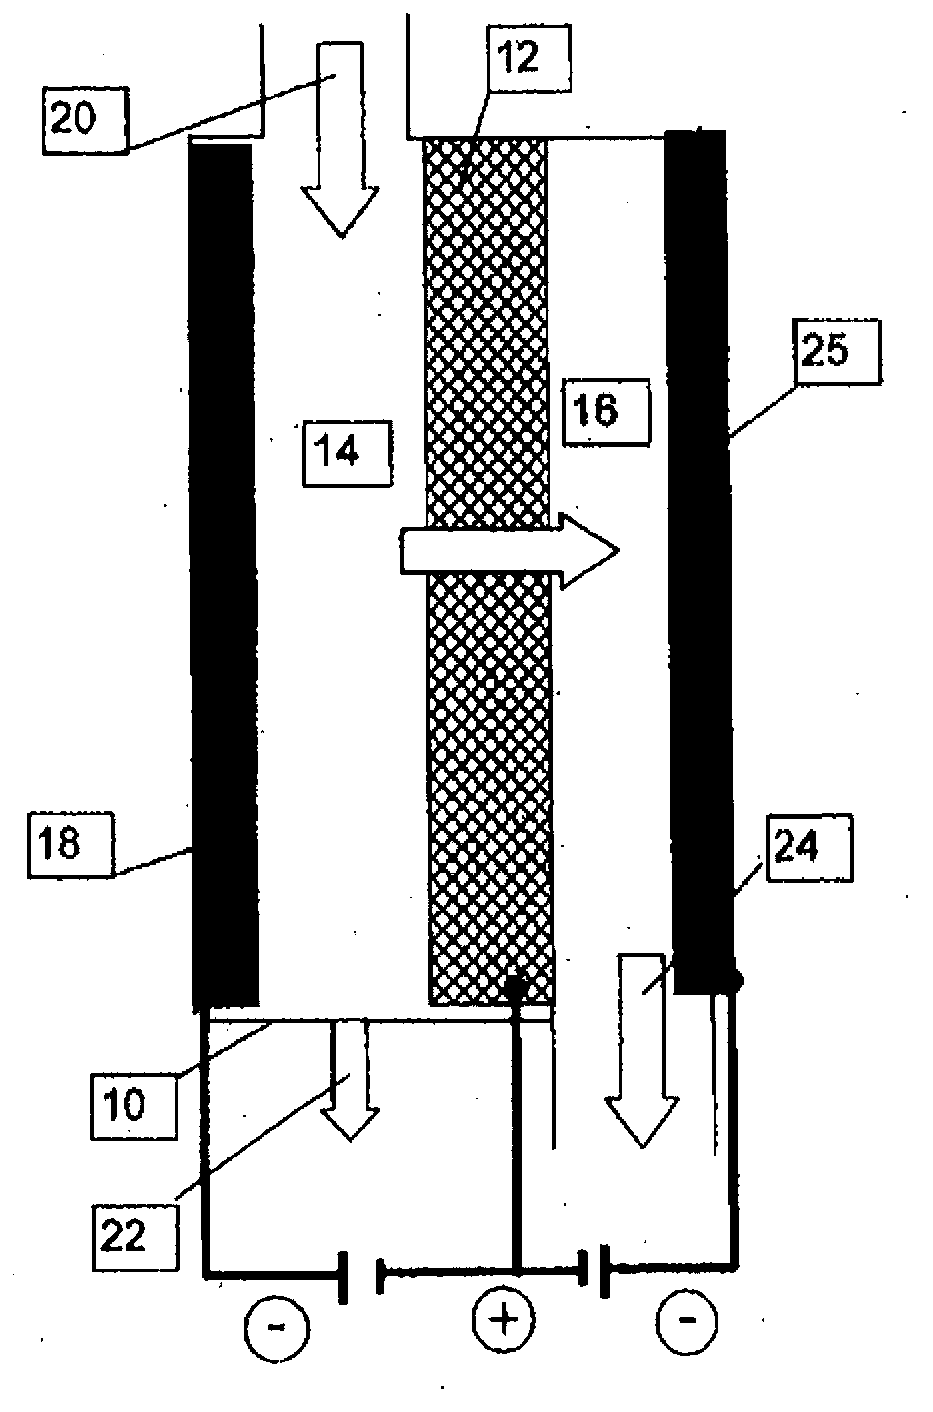 Apparatus for water treatment using filtration or a membrane separation method